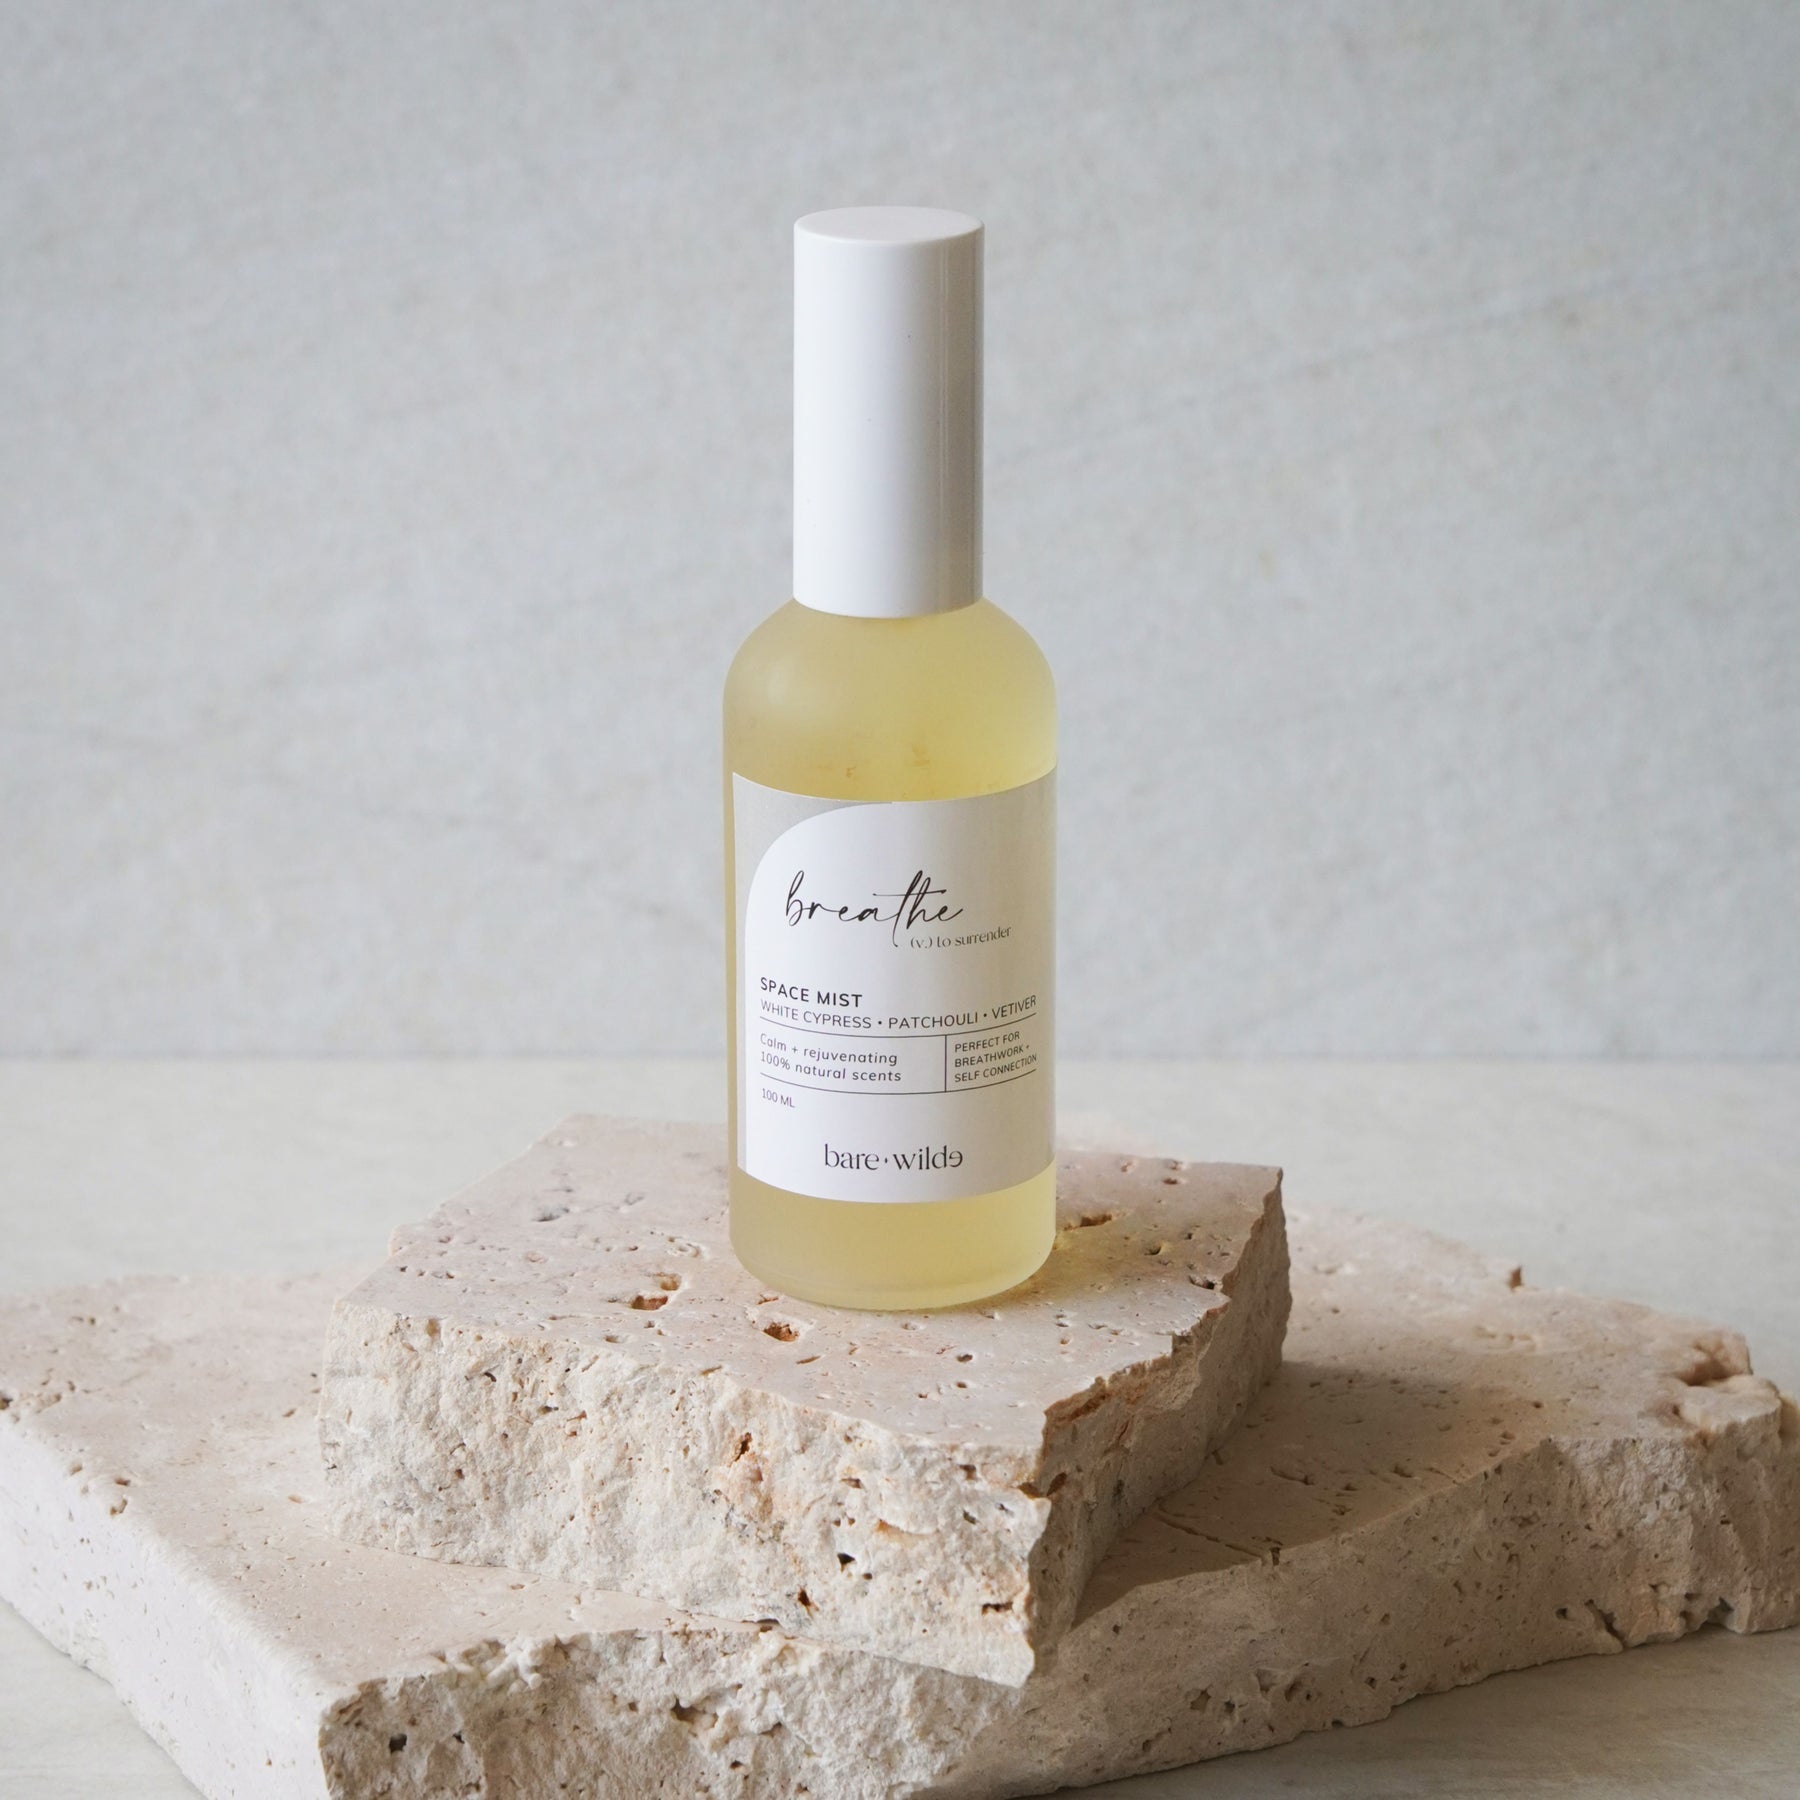 calming natural space mist with white cypress, patchouli and vetiver essential oils